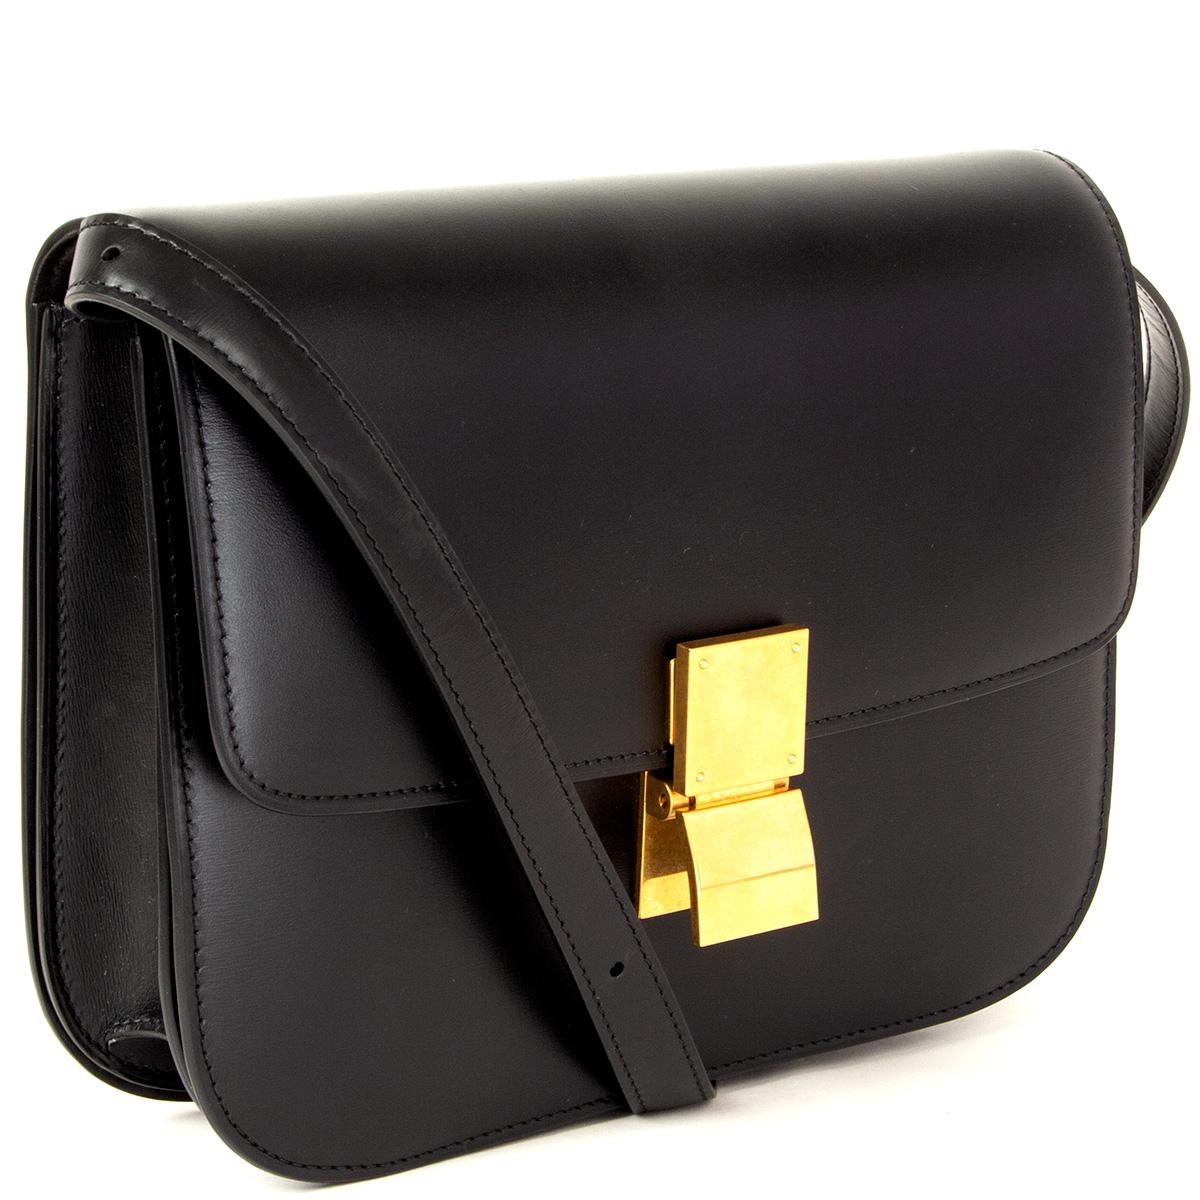 100% authentic Céline 'Medium Classic Bag' in black box calfskin. Opens with a push-lock on the front. The inside is divided into two compartments with two open pockets against the front and a zipper pocket against the back. Lined in black lambskin.